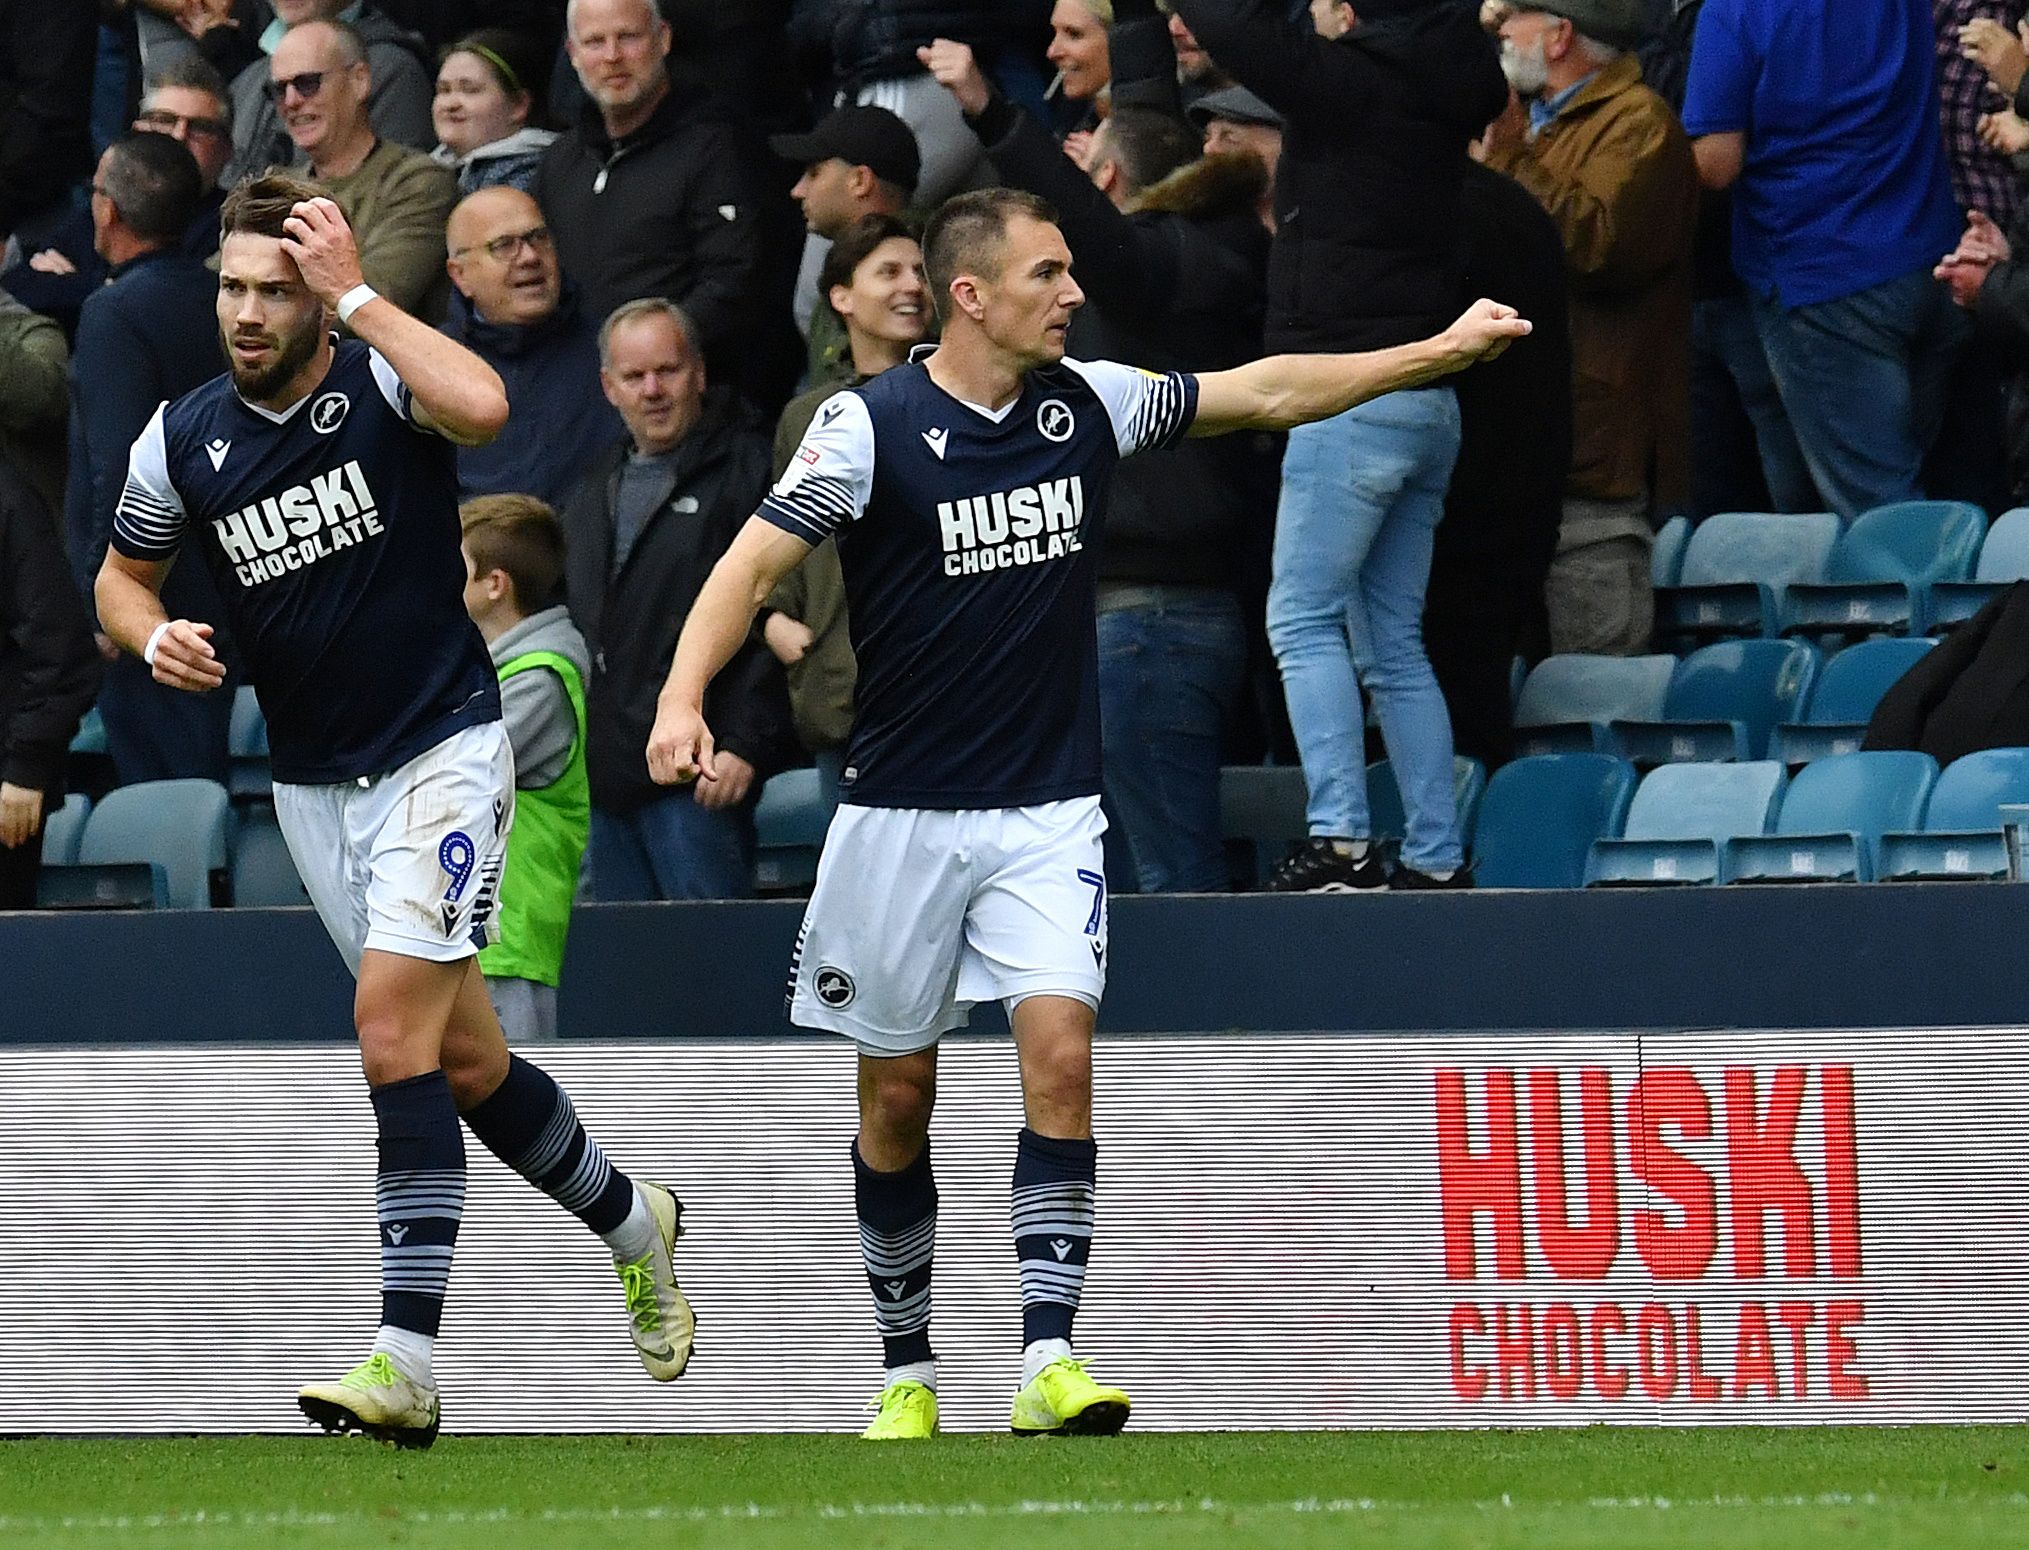 Soccer Football - Championship - Millwall v Leeds United - The Den, London, Britain - October 5, 2019   Millwall's Jed Wallace celebrates scoring their first goal   Action Images/Alan Walter    EDITORIAL USE ONLY. No use with unauthorized audio, video, data, fixture lists, club/league logos or "live" services. Online in-match use limited to 75 images, no video emulation. No use in betting, games or single club/league/player publications.  Please contact your account representative for further de